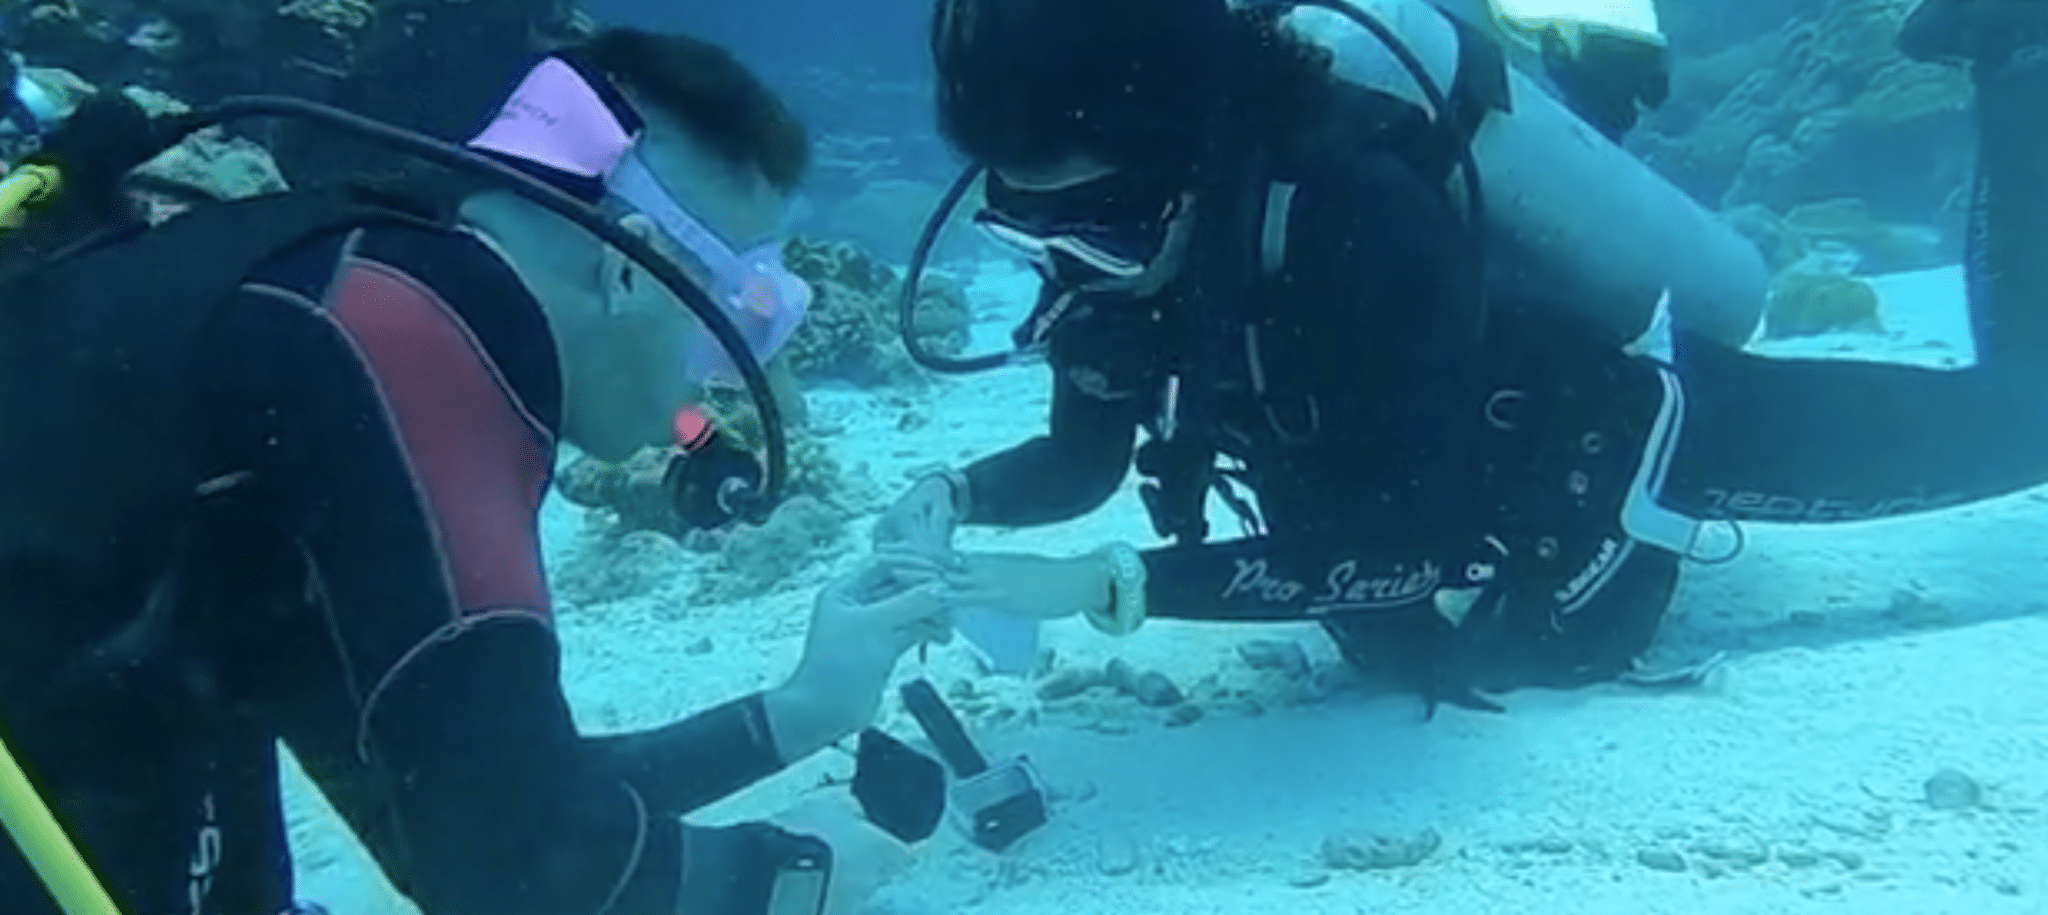 a-marriage-proposal-36-feet-underwater